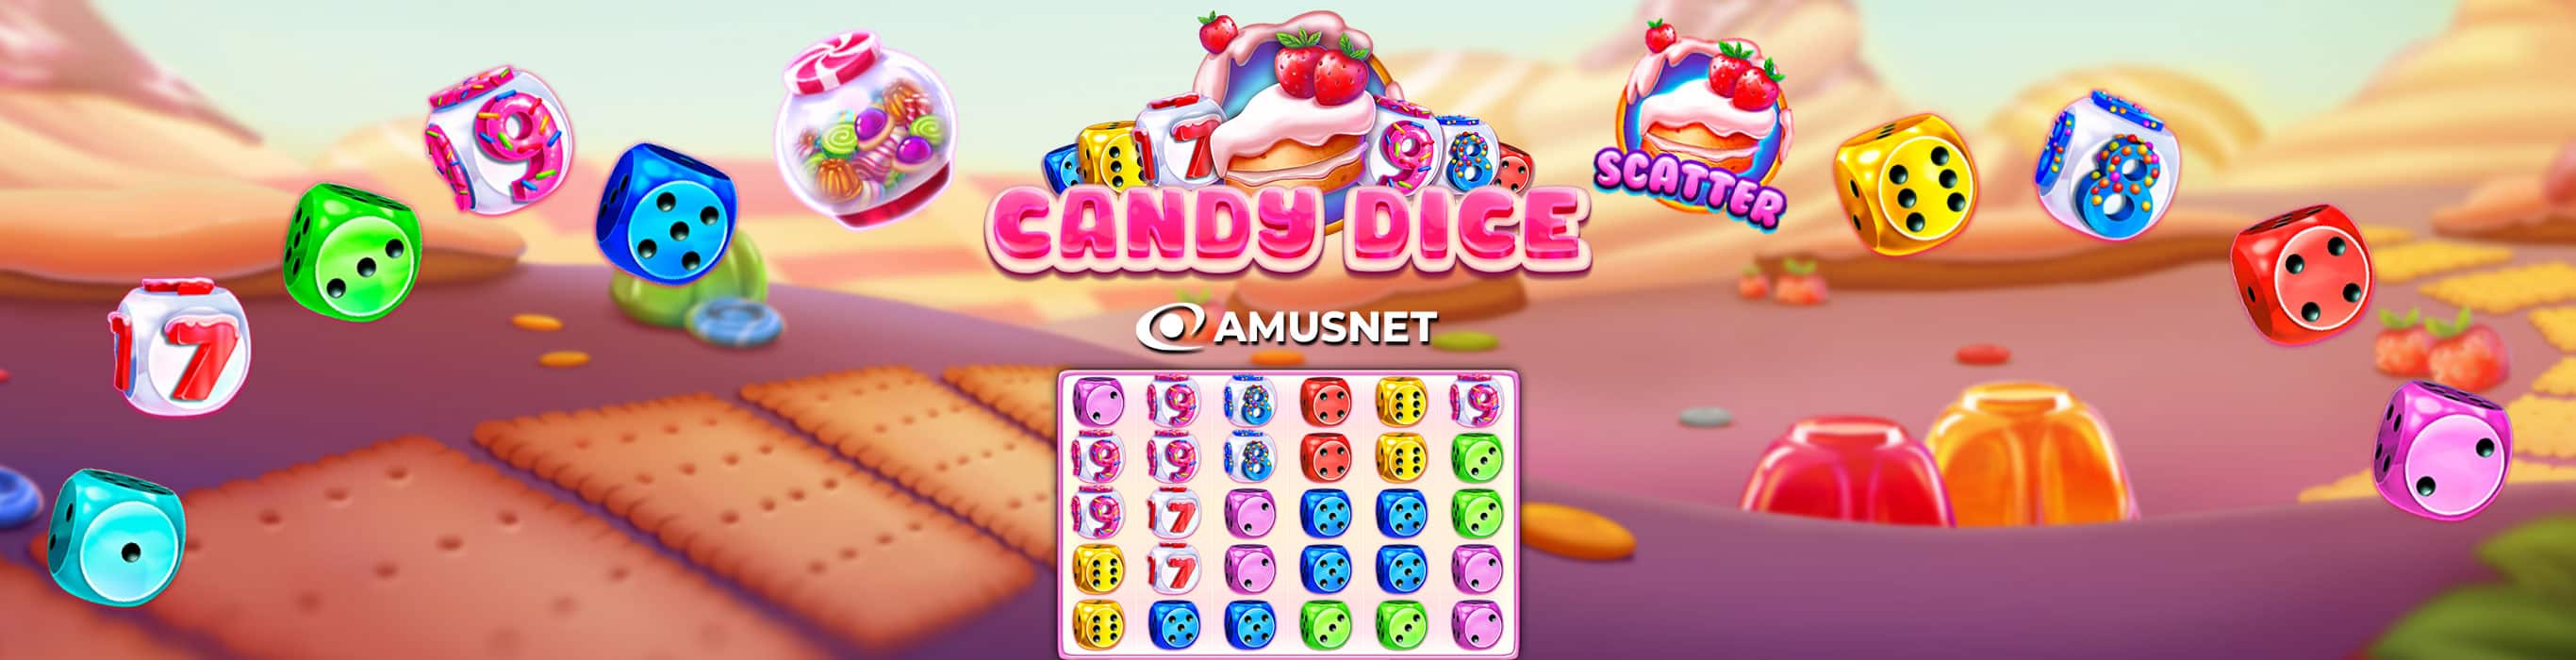 candydice-36win-banner-2732x700_1